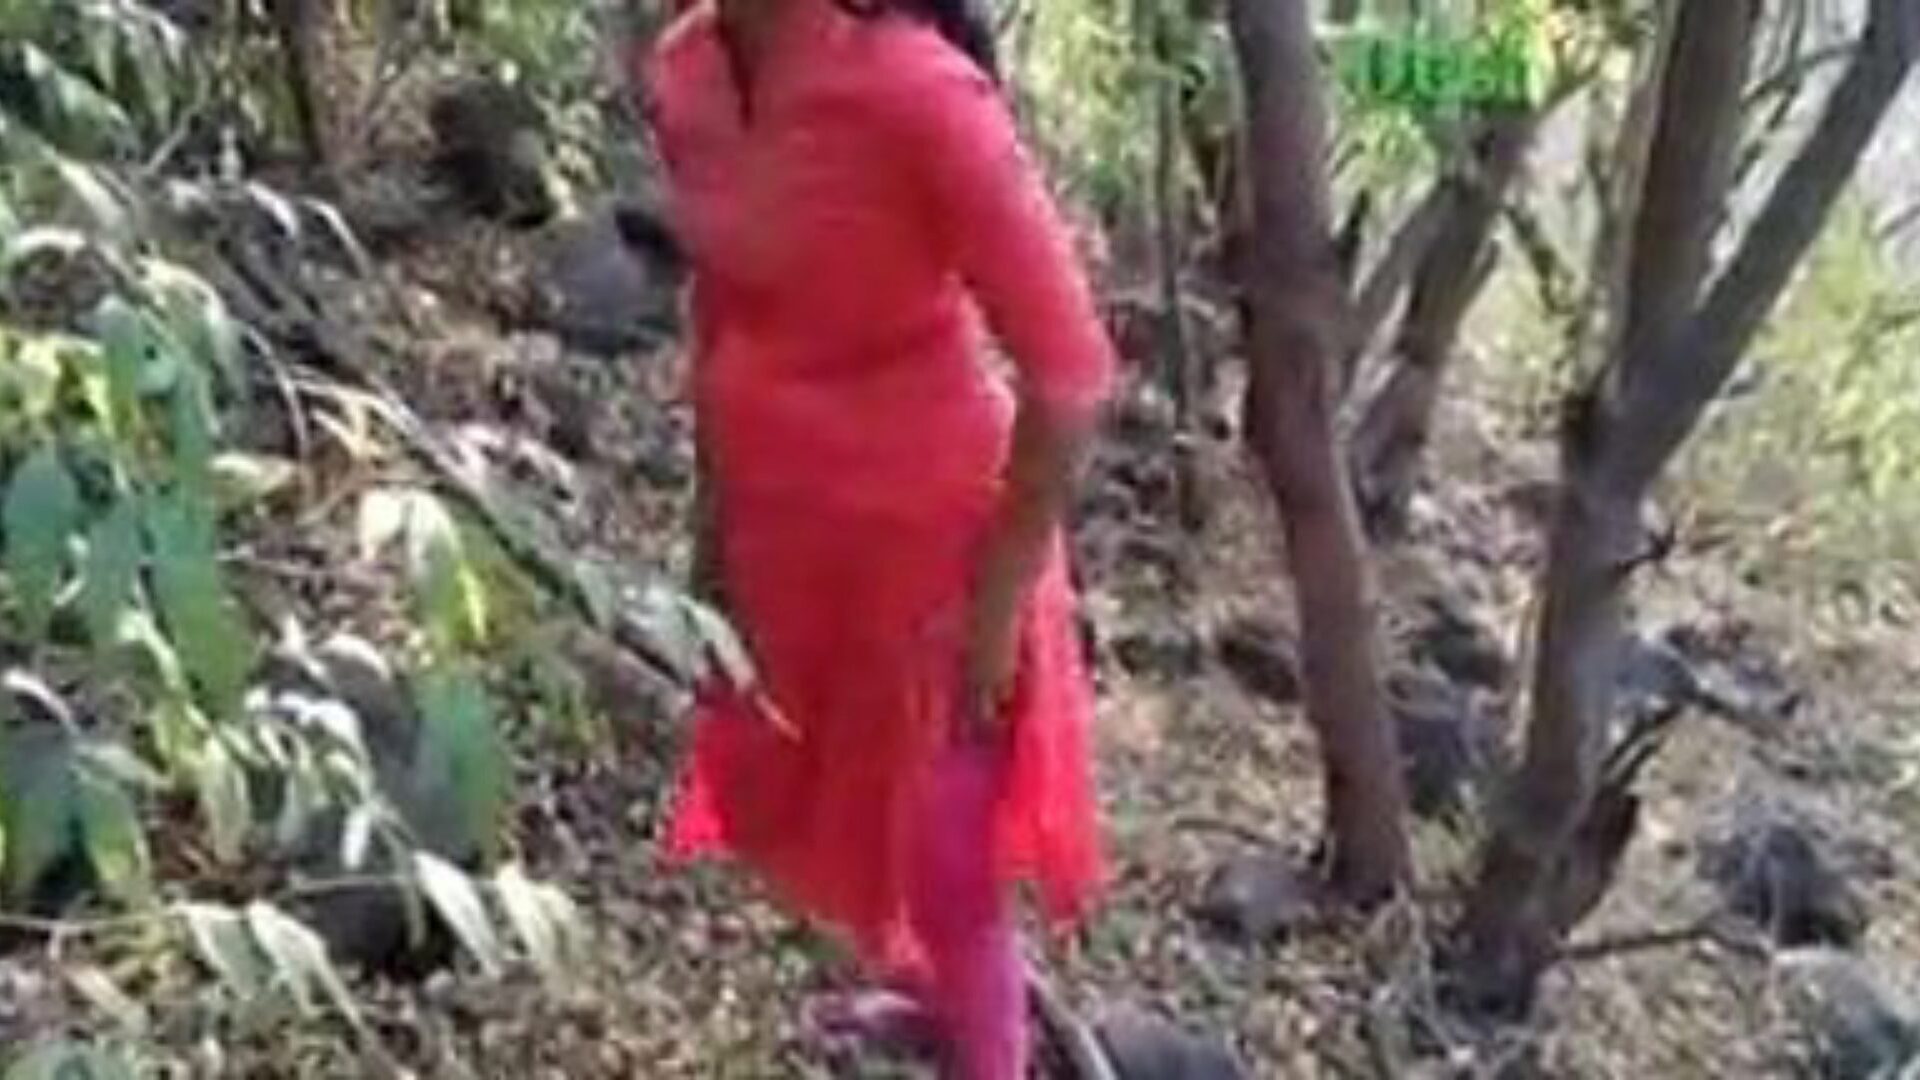 Desi Girlfriend Fuck in Jungle, Free Indian Porn Video f0 Watch Desi Girlfriend Fuck in Jungle clip on xHamster, the biggest fuck-fest tube web page with tons of free-for-all Indian Hardcore & Squirting porno movie scenes